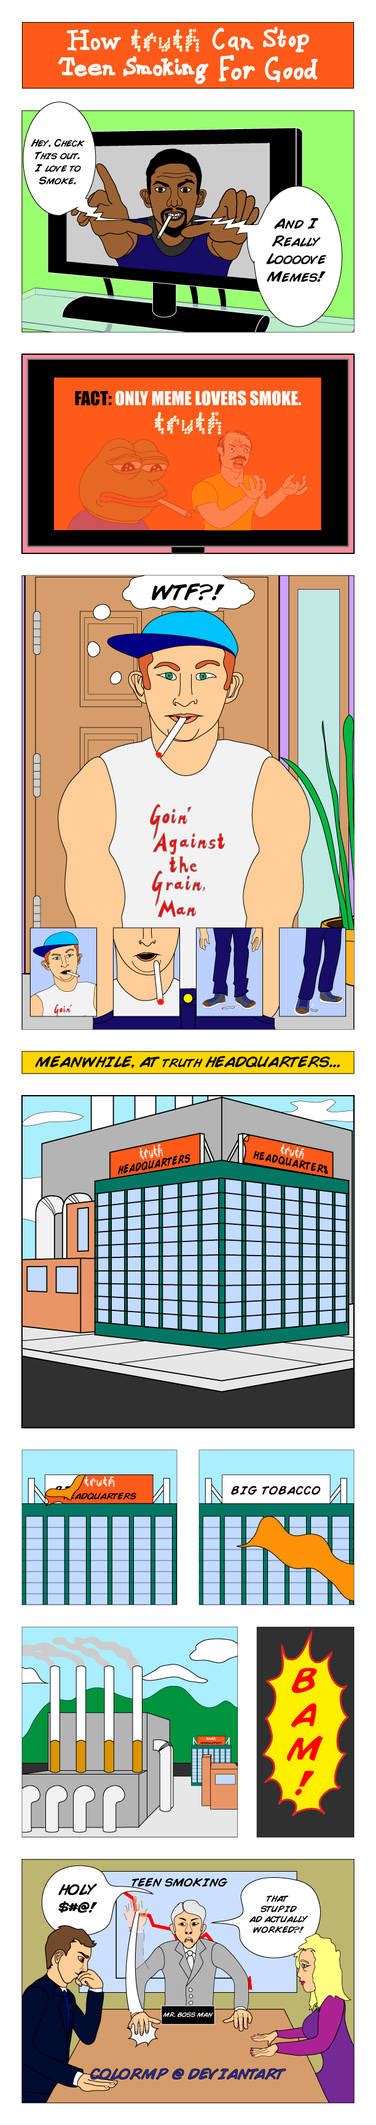 Truth Comic By Colormp On Deviantart